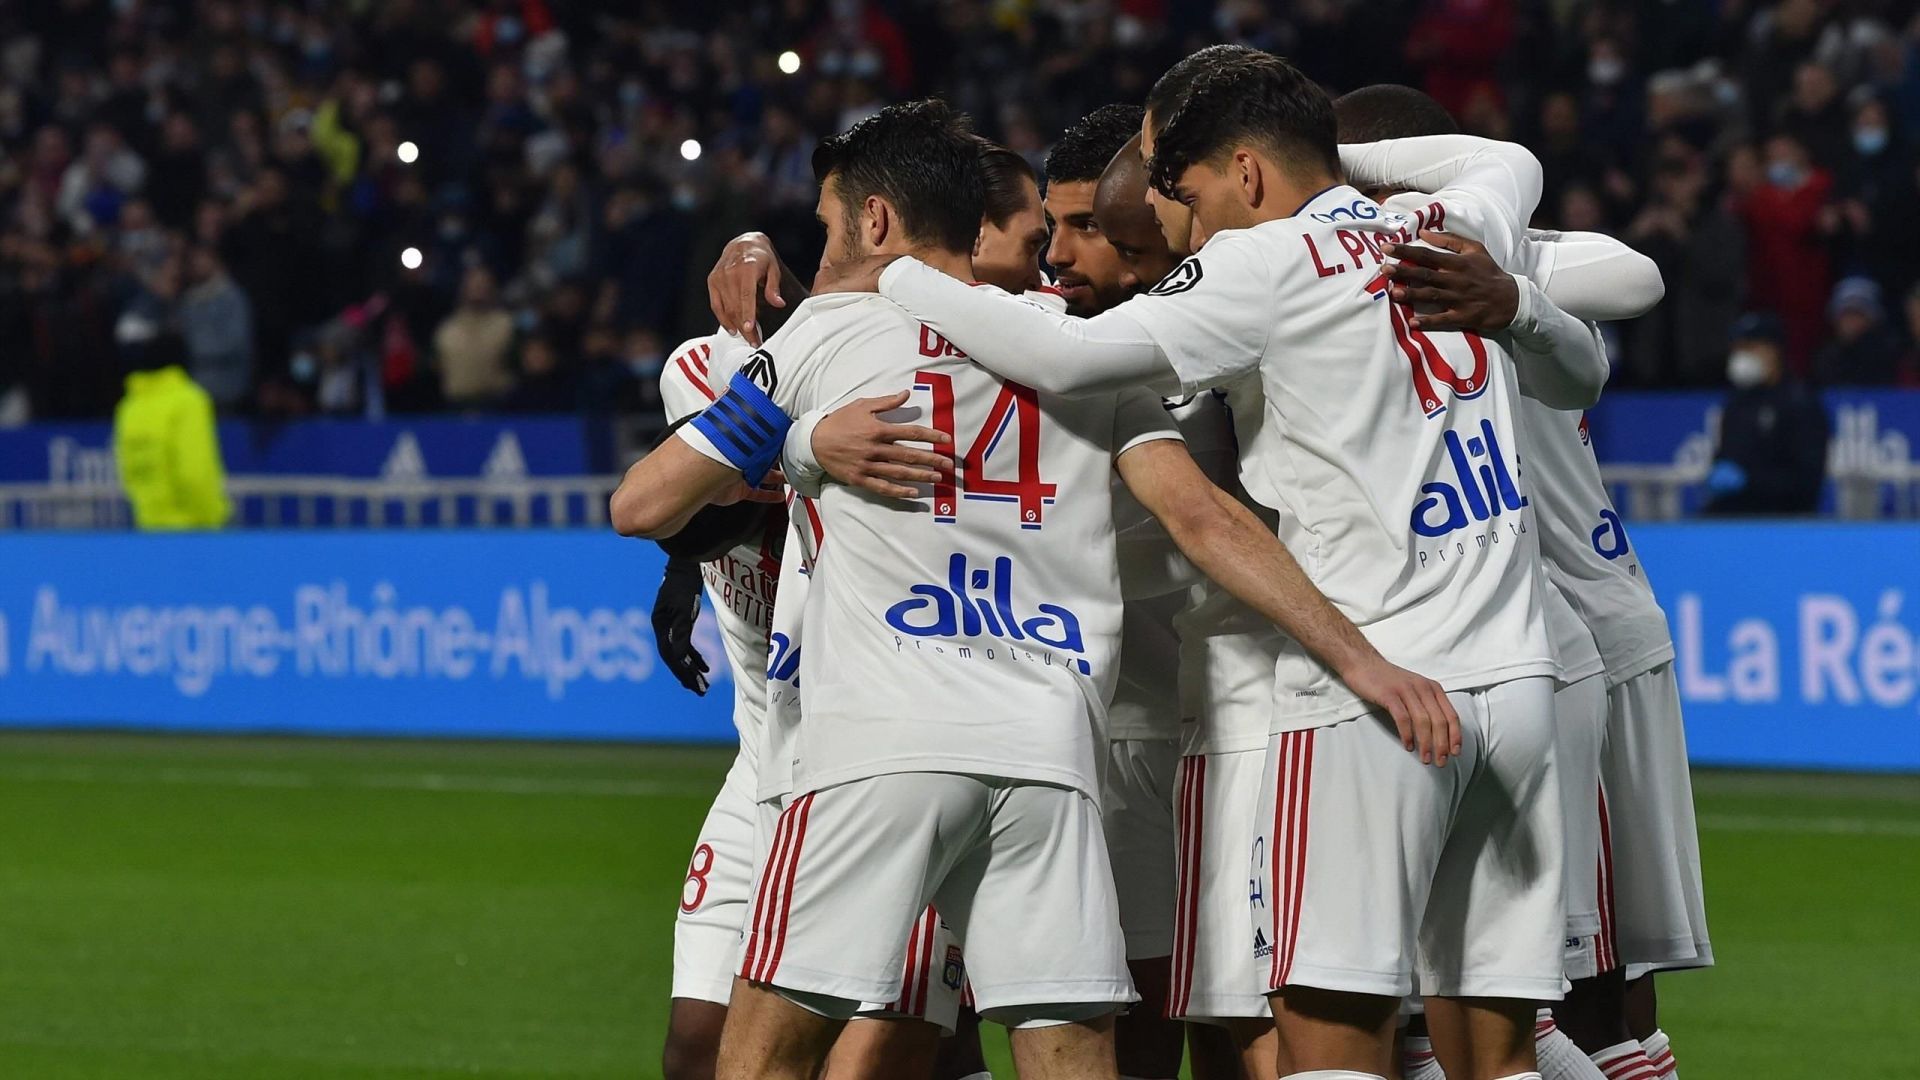 Can Lyon overcome Ligue 1 champions Lille this weekend?